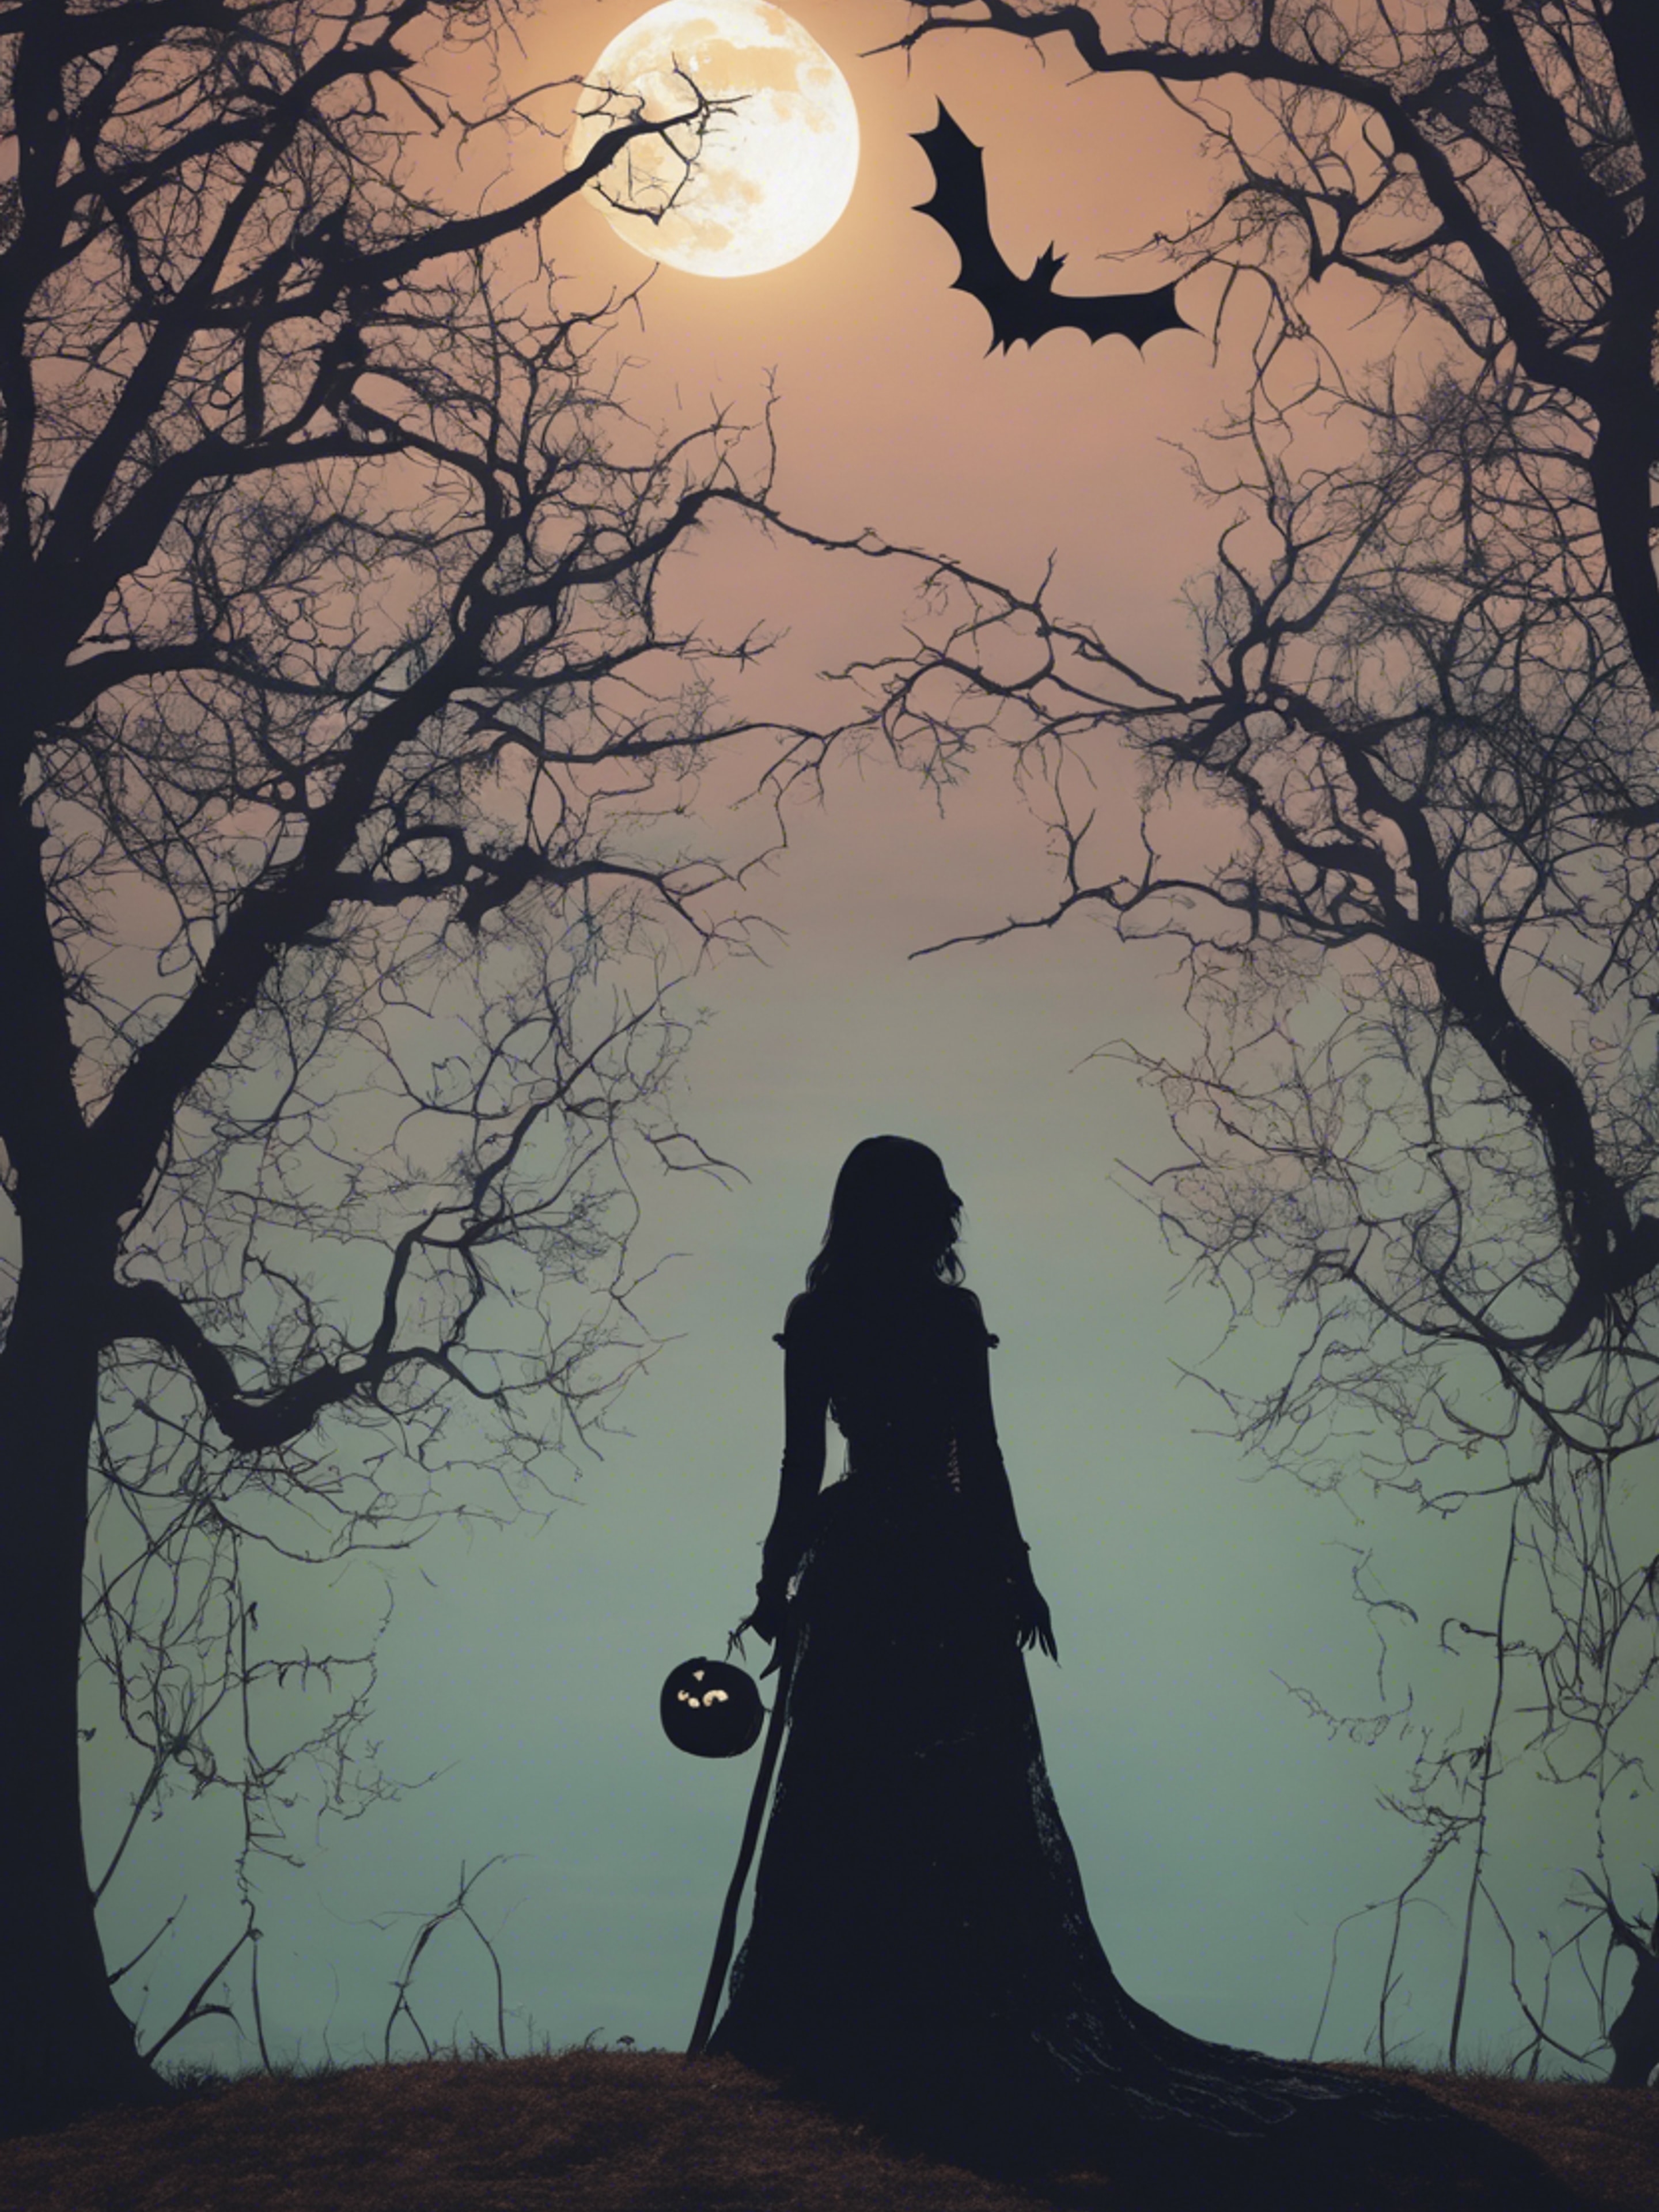 A pastel gothic art piece featuring a halloween-inspired silhouette against a full moon. Tapeta[0c56d77b25284c4fbd1c]